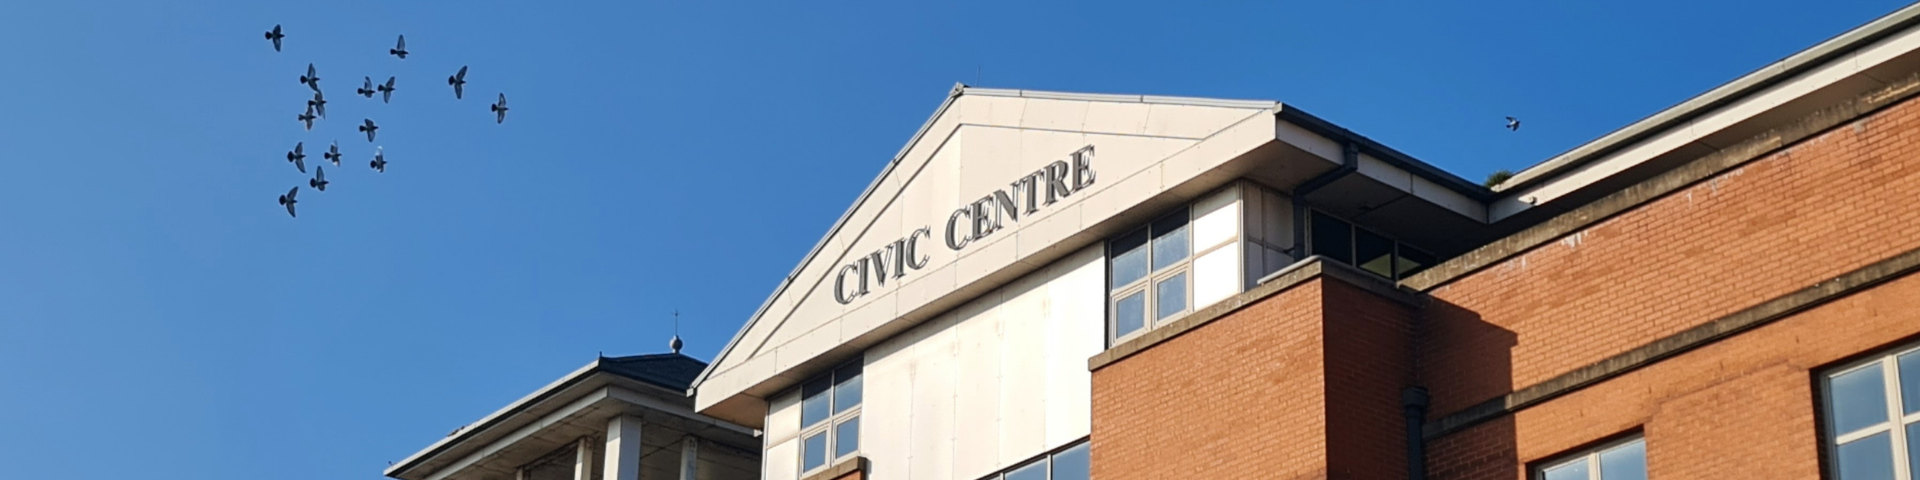 Stoke on Trent City Council Civic Offices